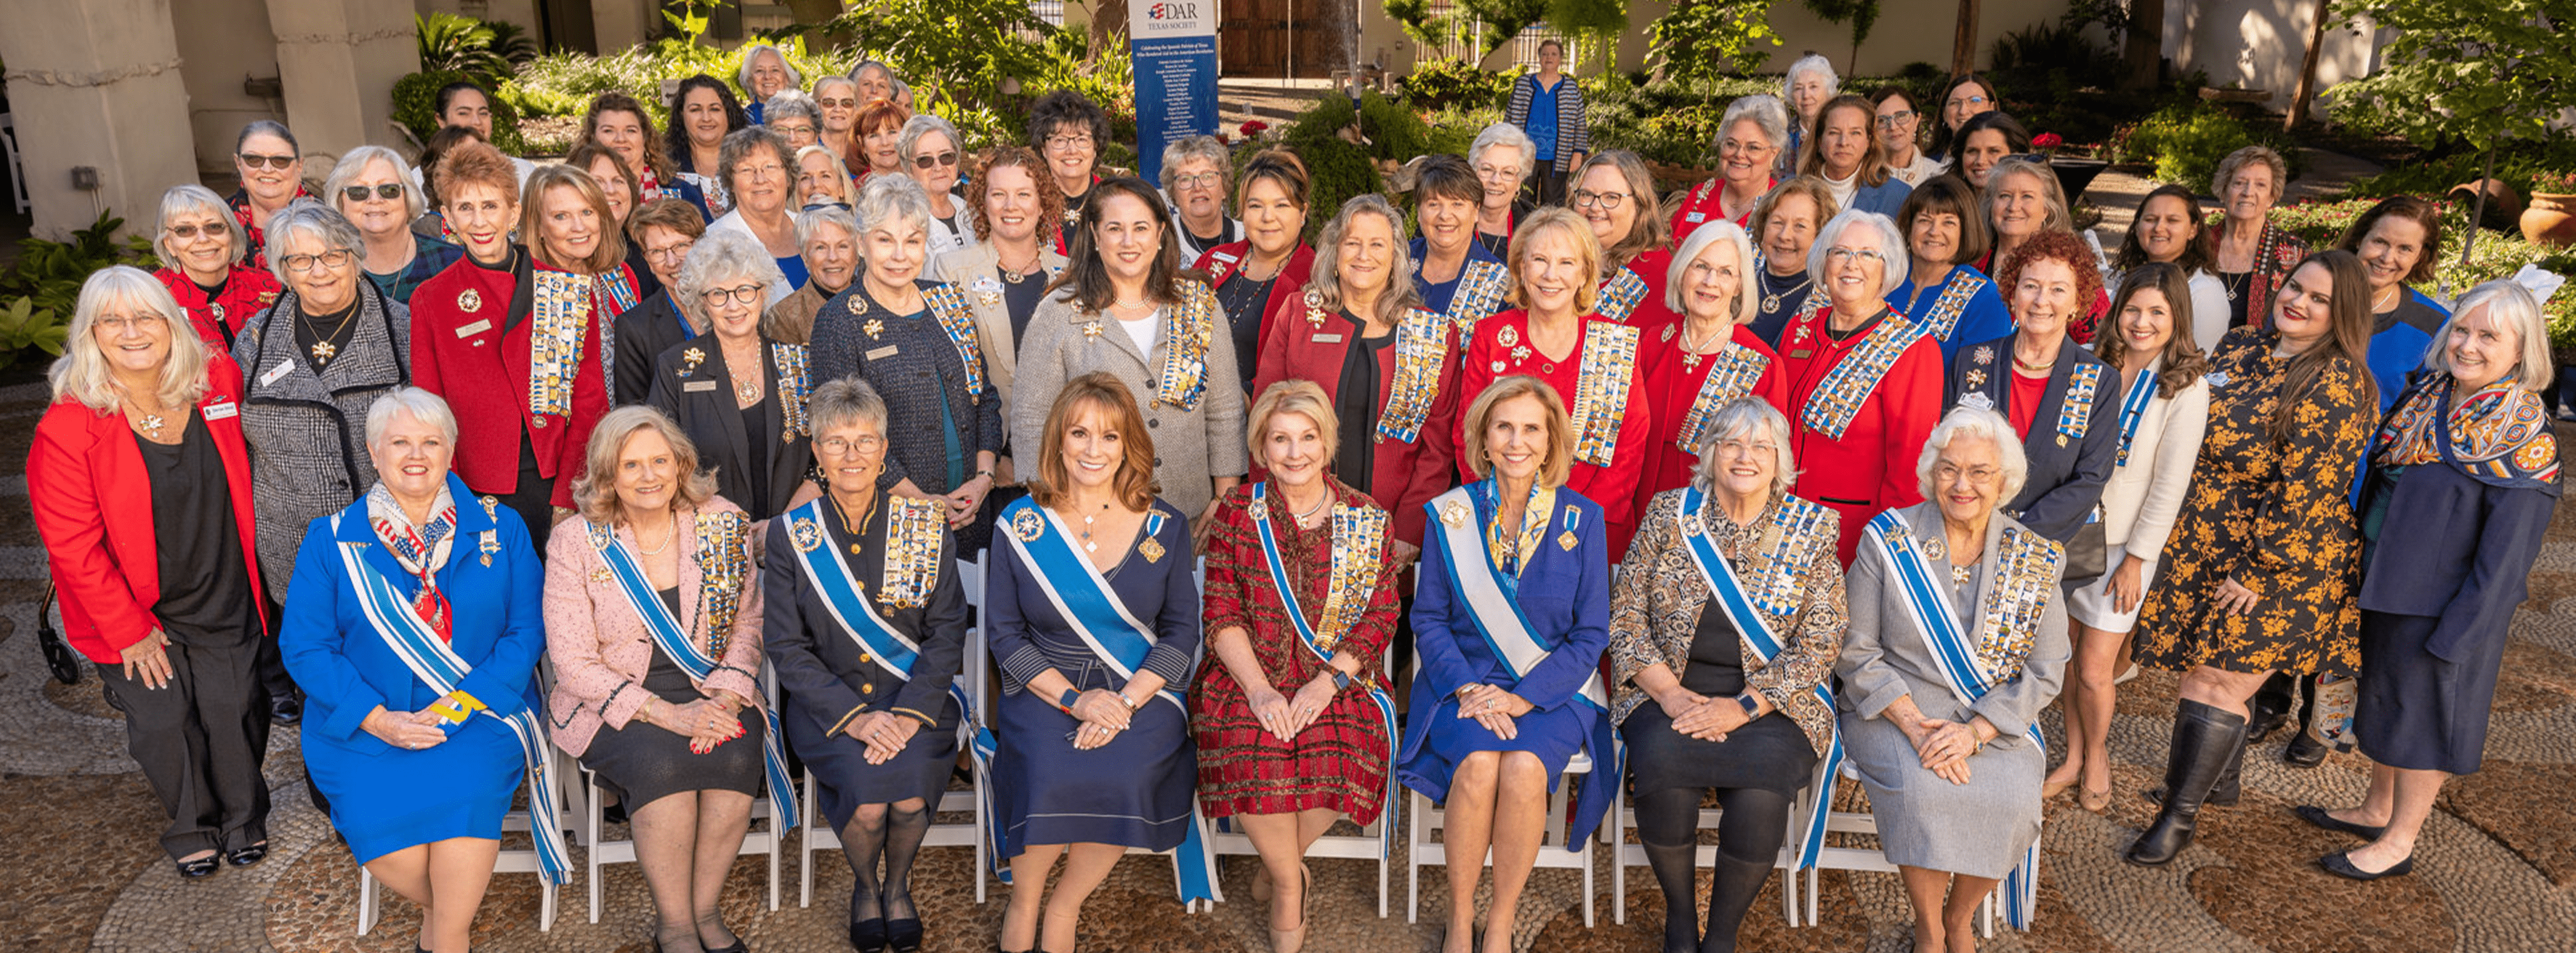 Daughters of the American Revolution | San Antonio Event Photography